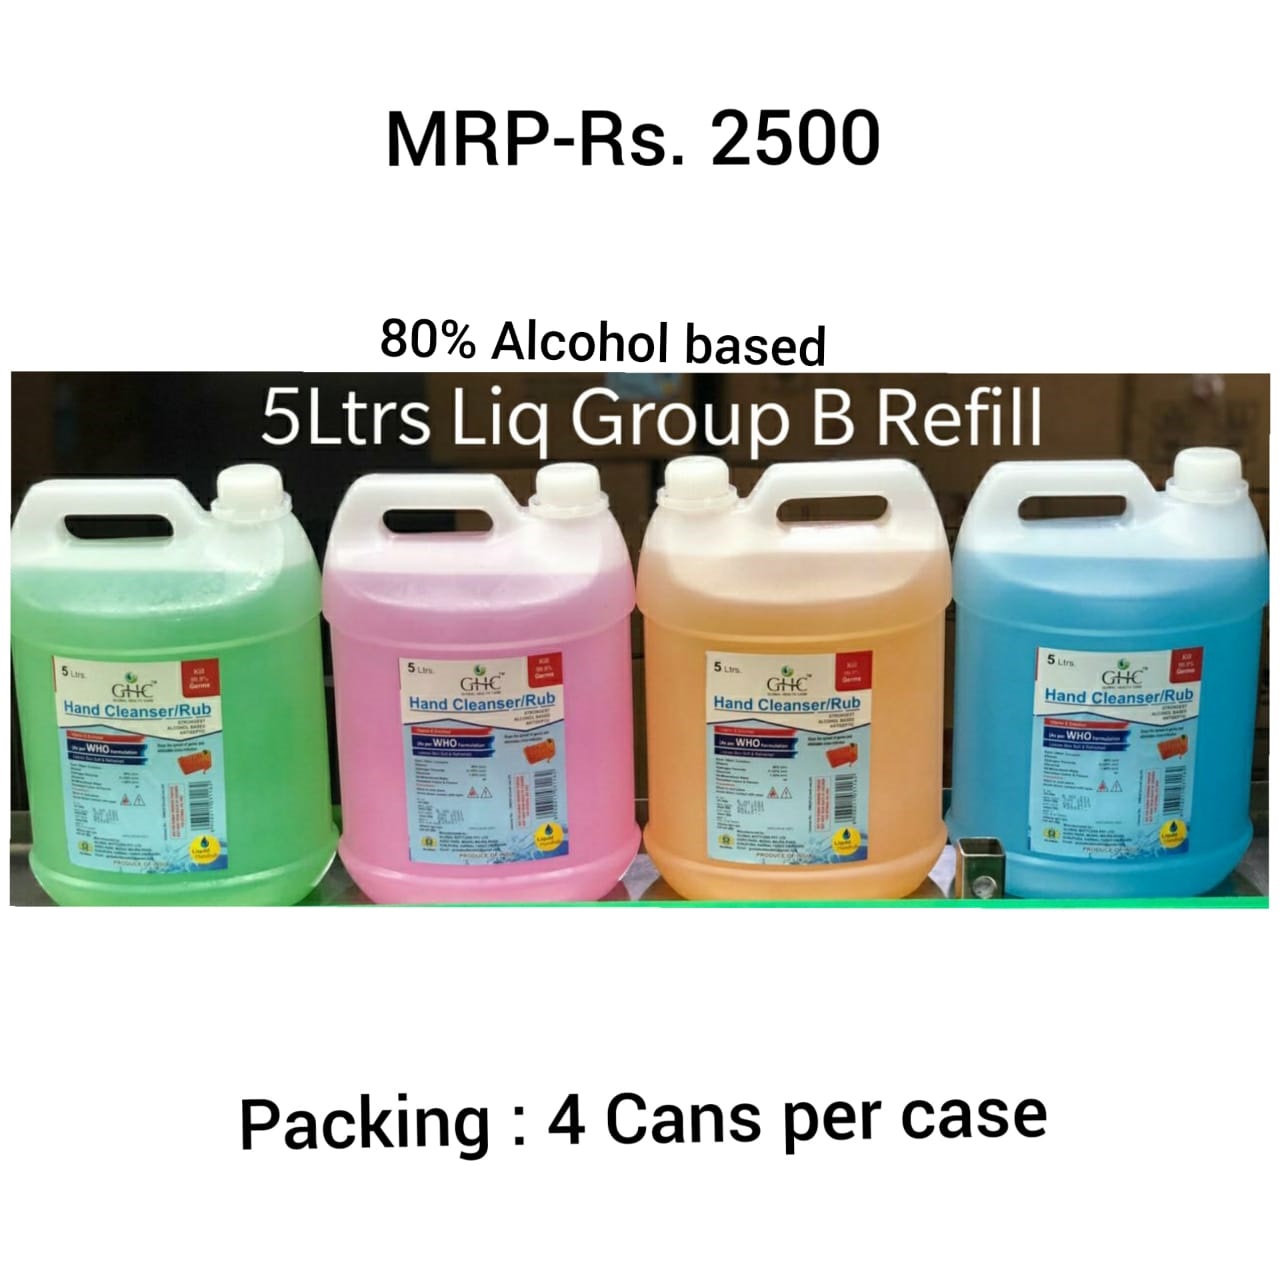 80% Alcohol Based Hand Sanitizer - Refill Pack, MRP 2500.00 from Jackpot Durables